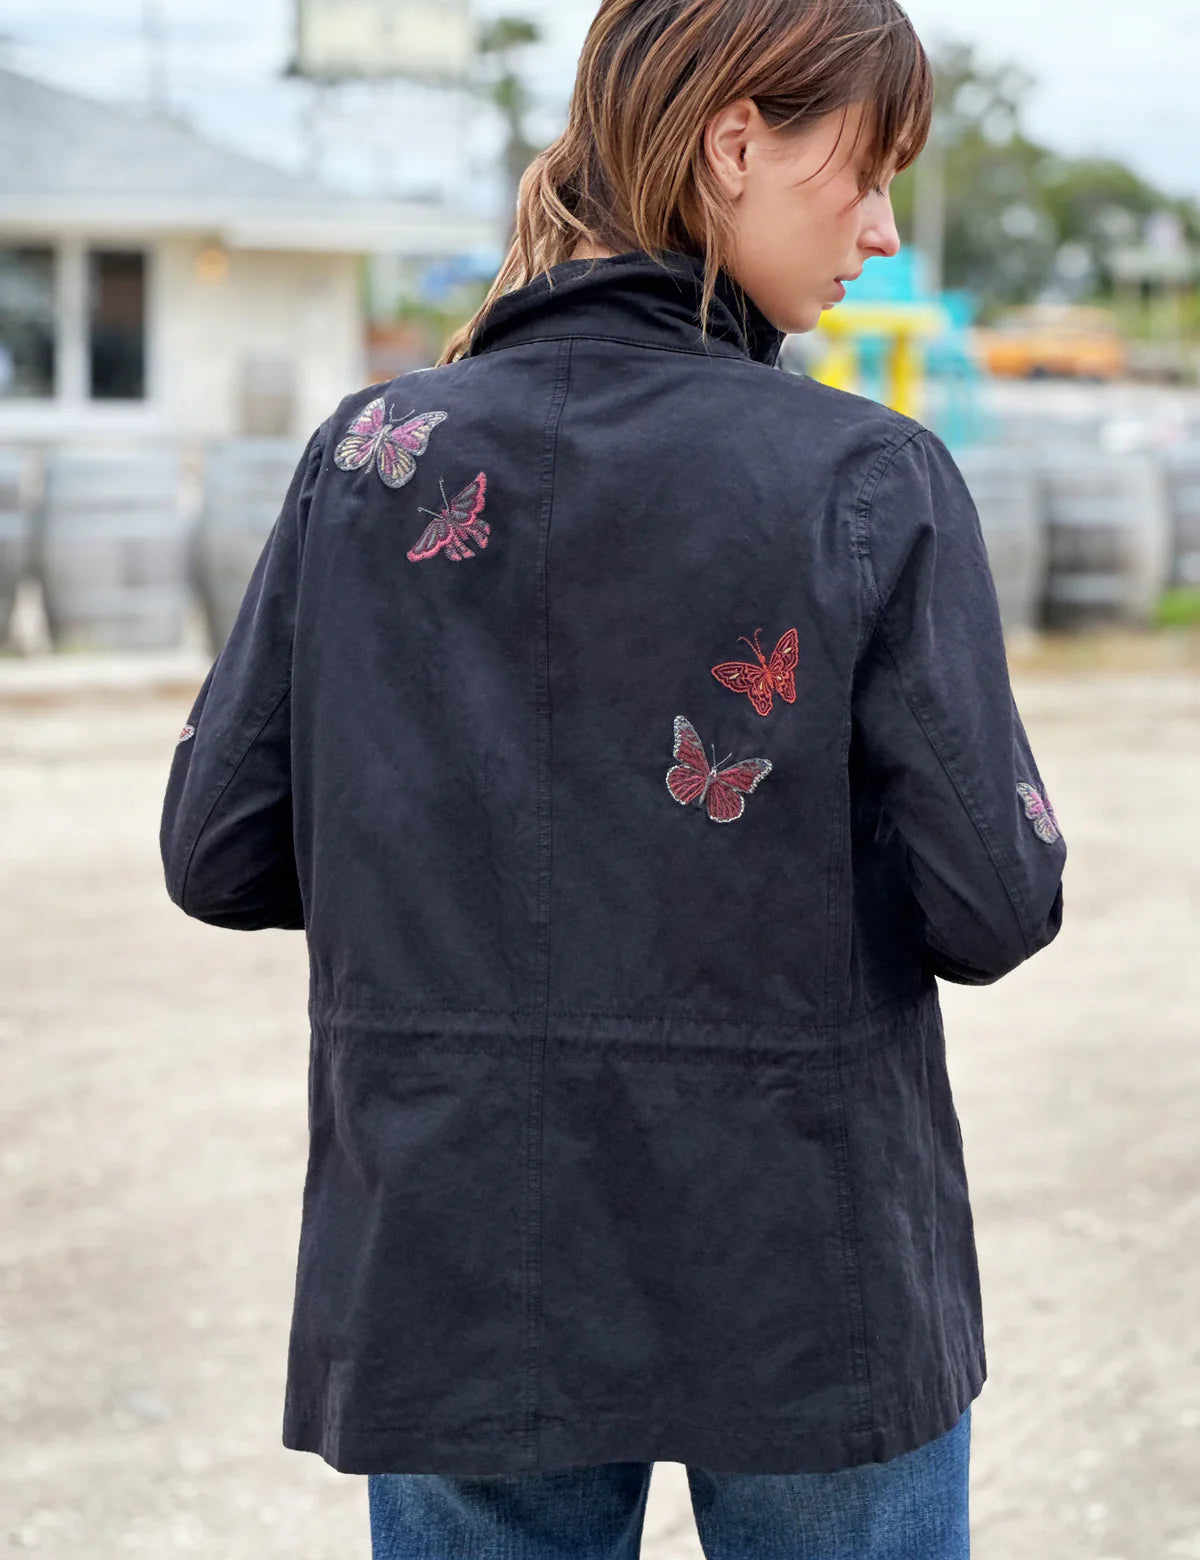 Rider Embroidered Jacket TL1006J - Third Layer